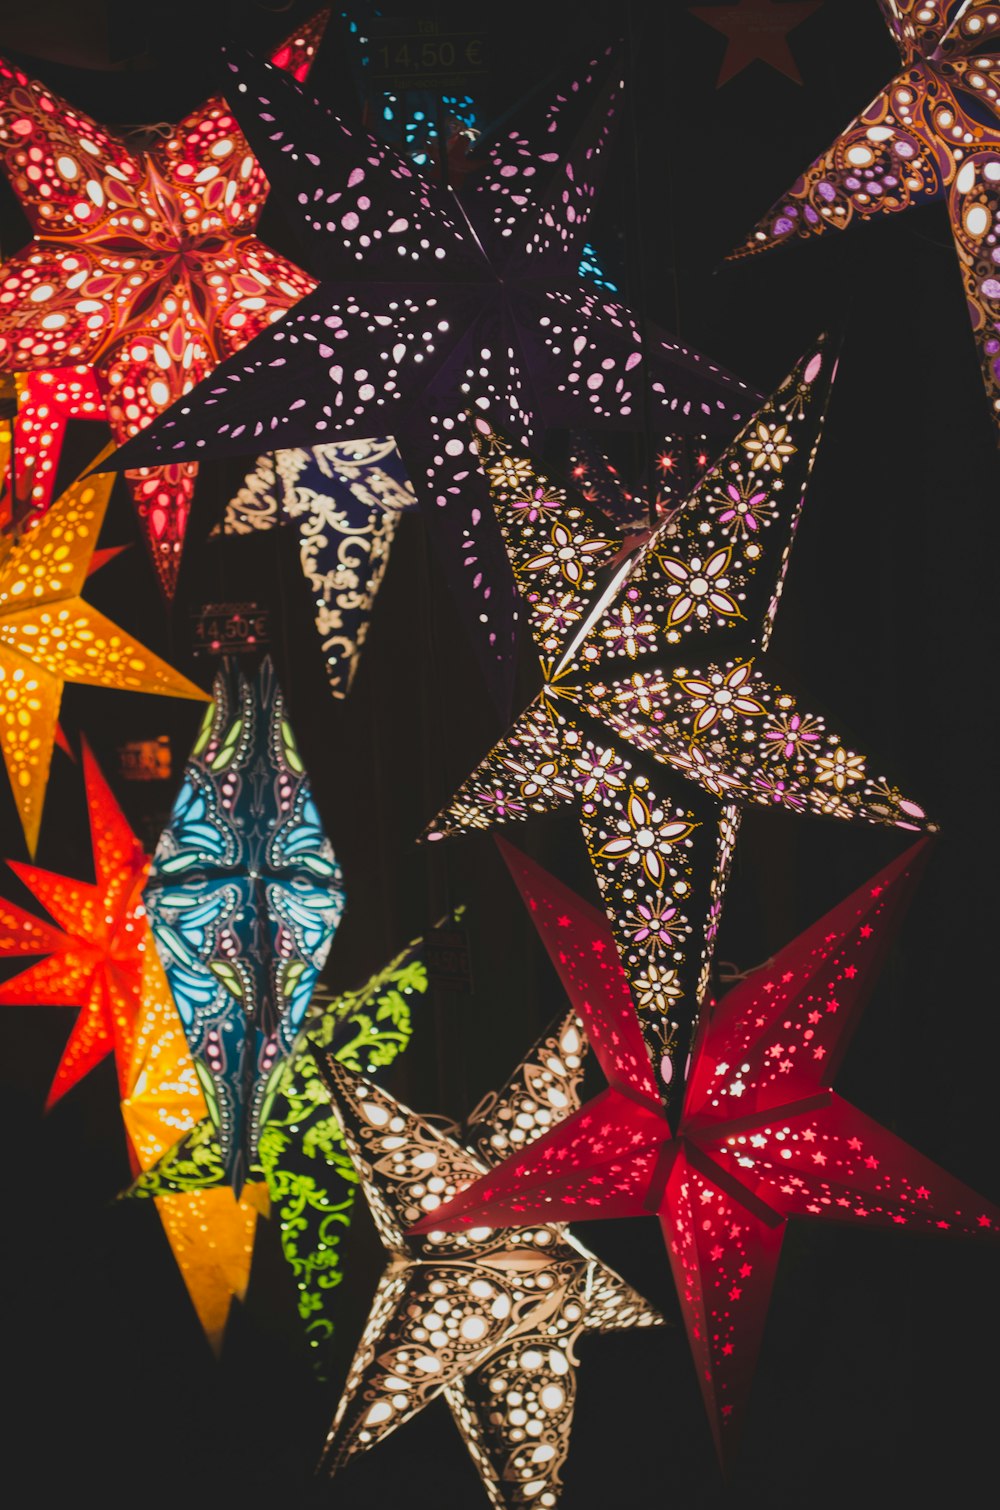 Colorful star shaped lights.